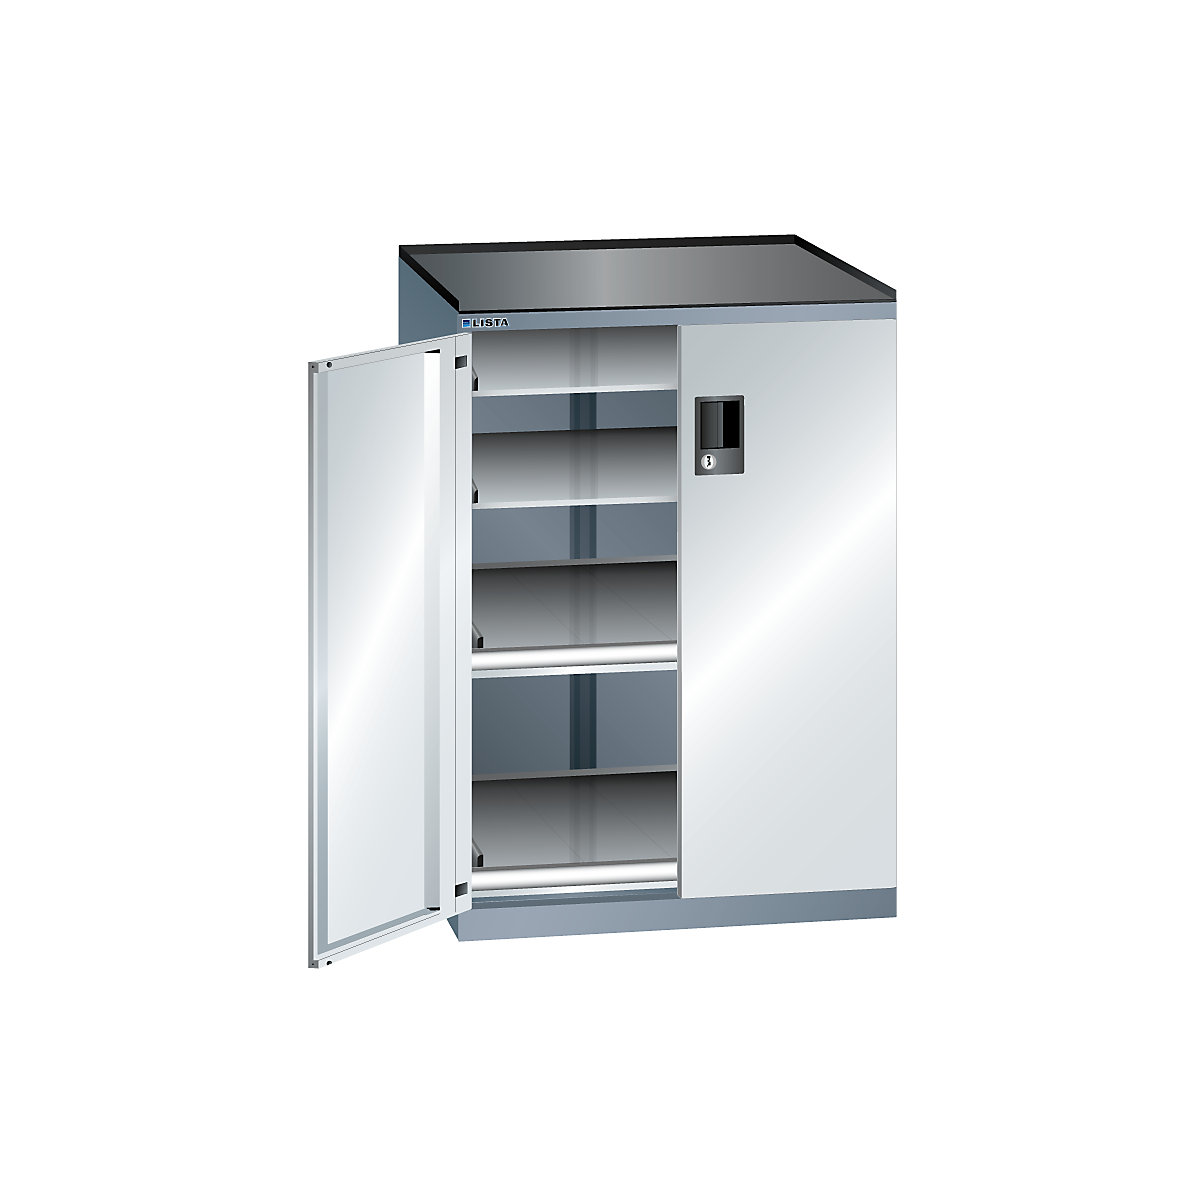 Drawer cupboard with hinged doors – LISTA, height 1020 mm, 4 shelves, max. load 200 kg, grey metallic / light grey-2